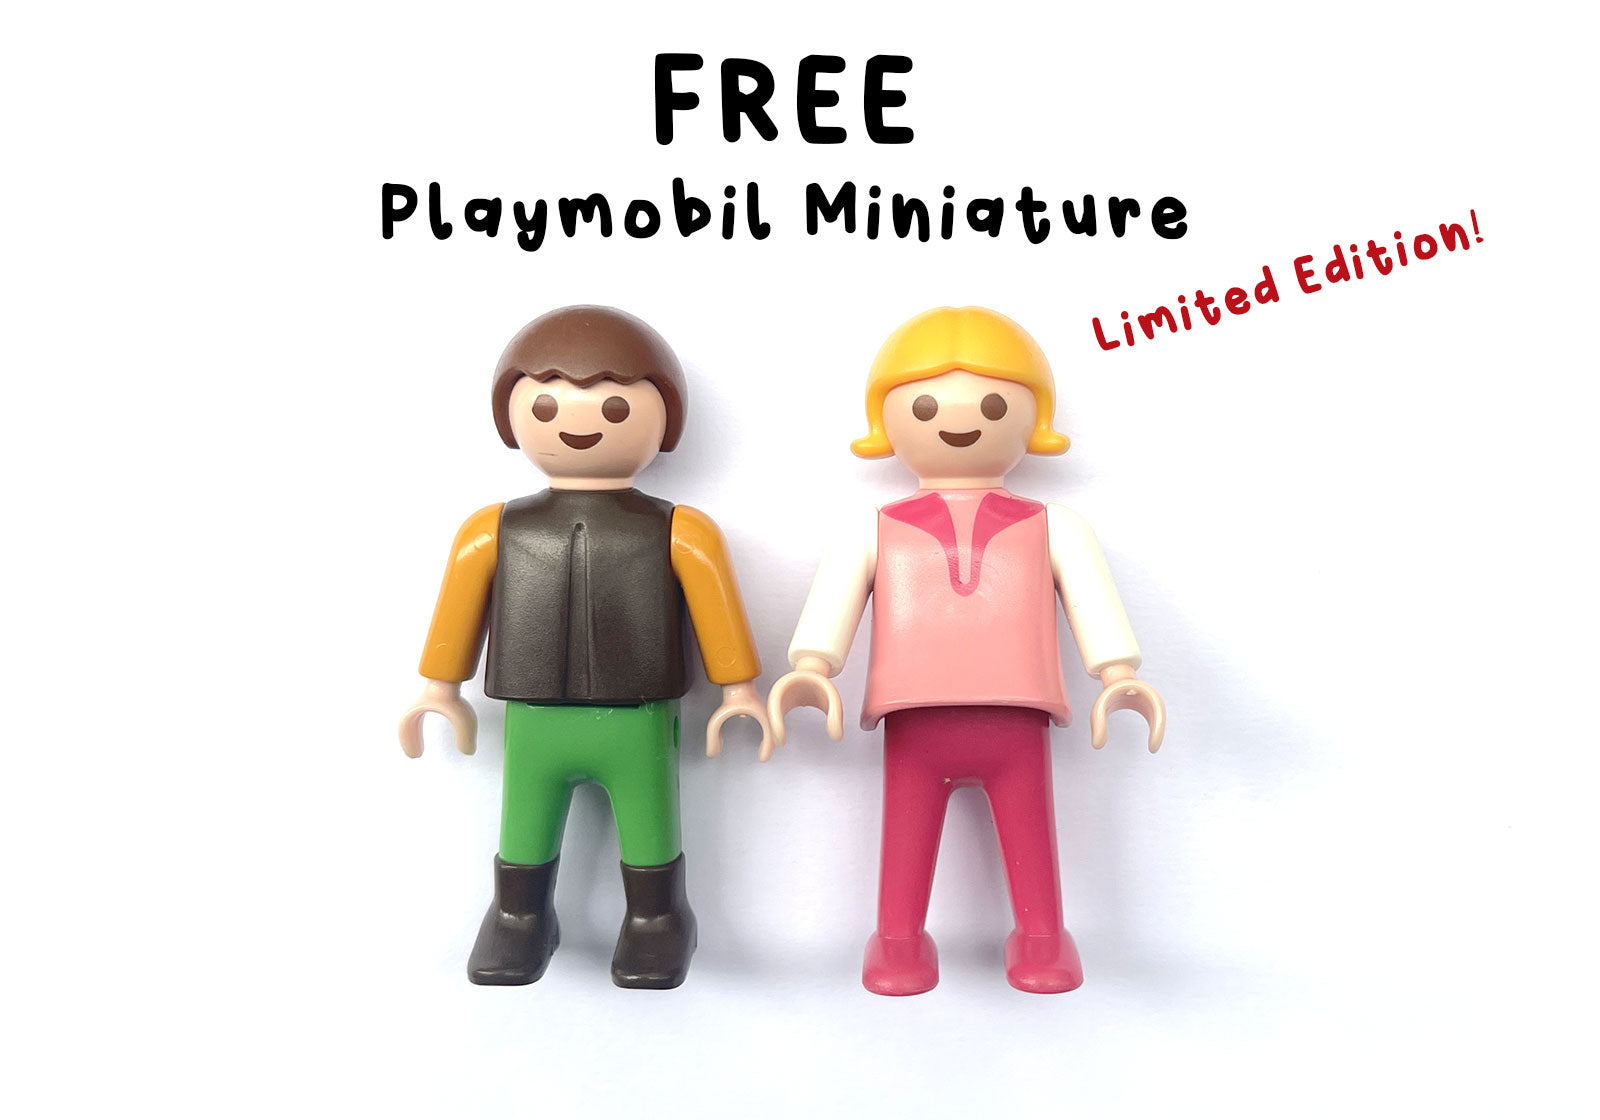 FREE Miniature Playmobil (NOT FOR SALE)